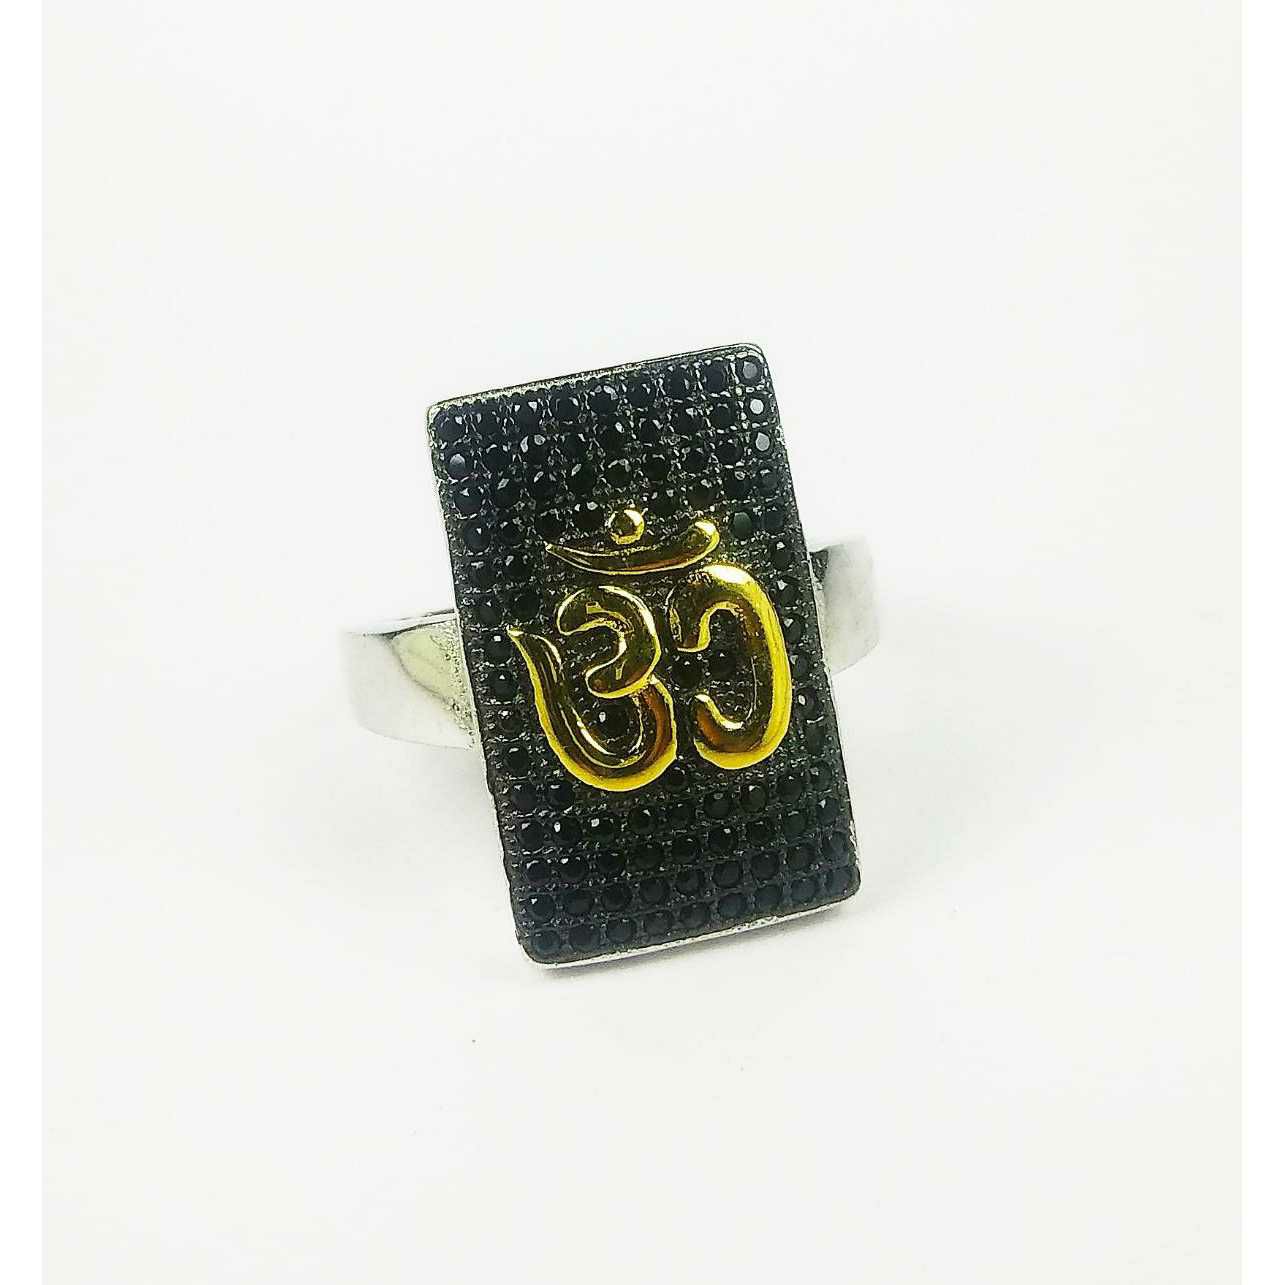 Fancy 925 Silver Gents Ring With Om Shape